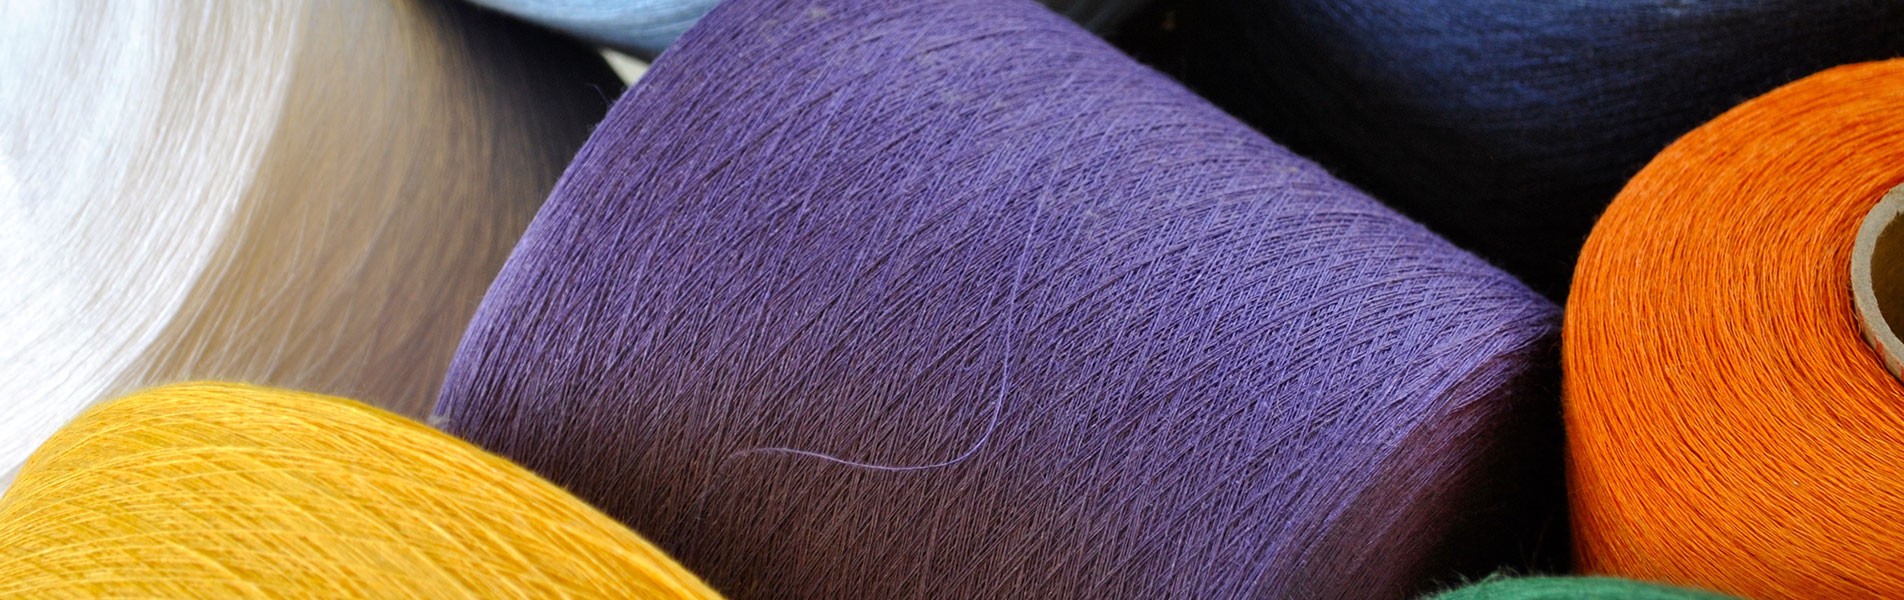 Grassi weaving - our yarns